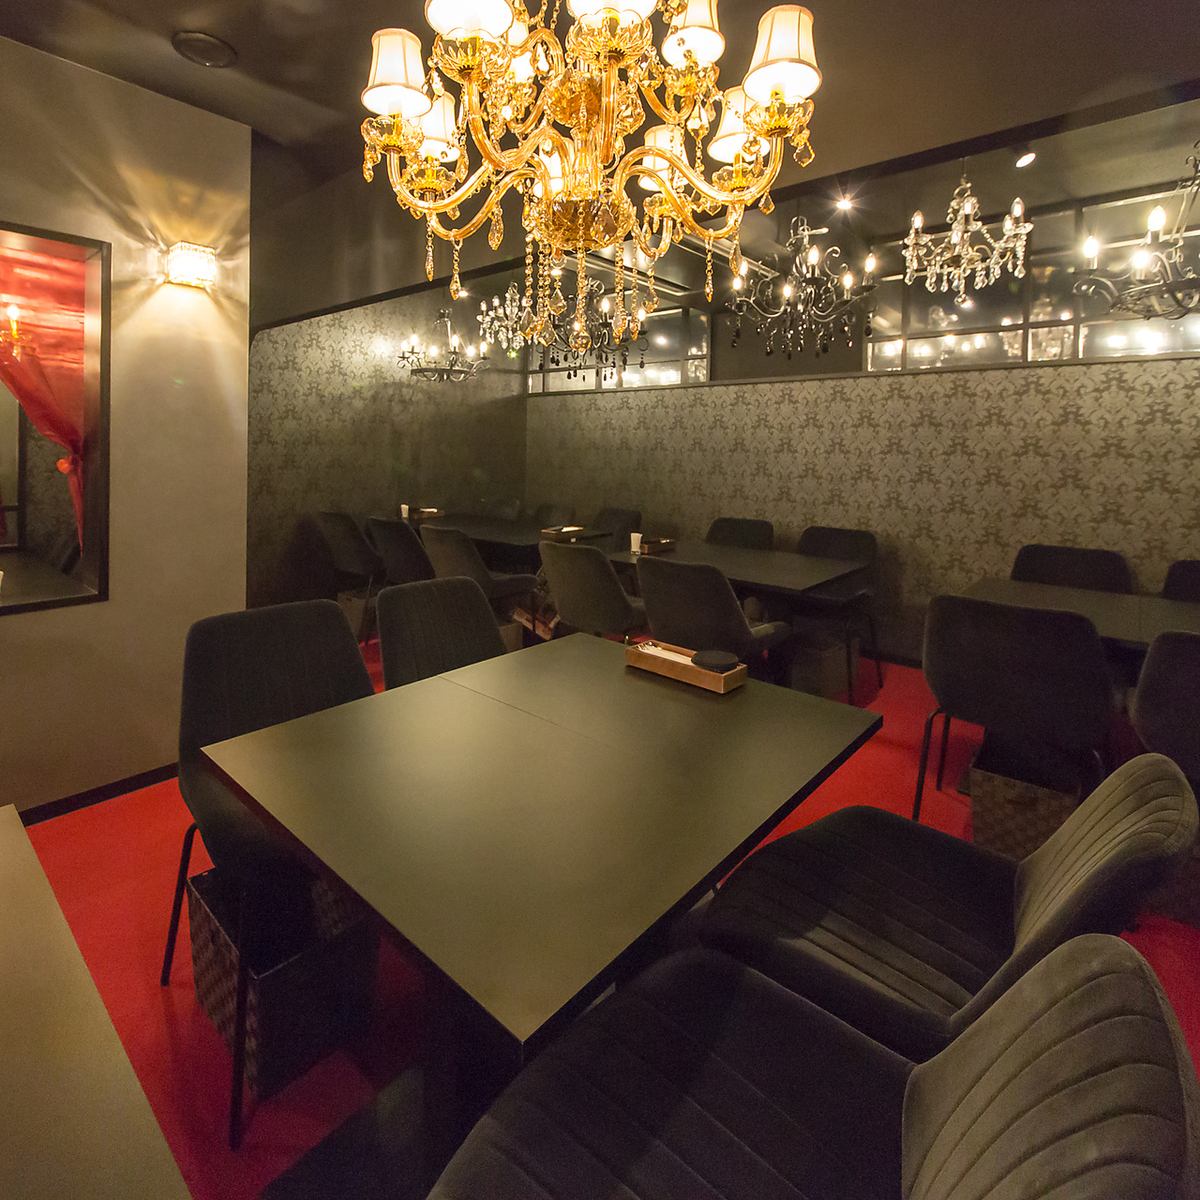 Chic atmosphere based on black and red with beautiful chandeliers